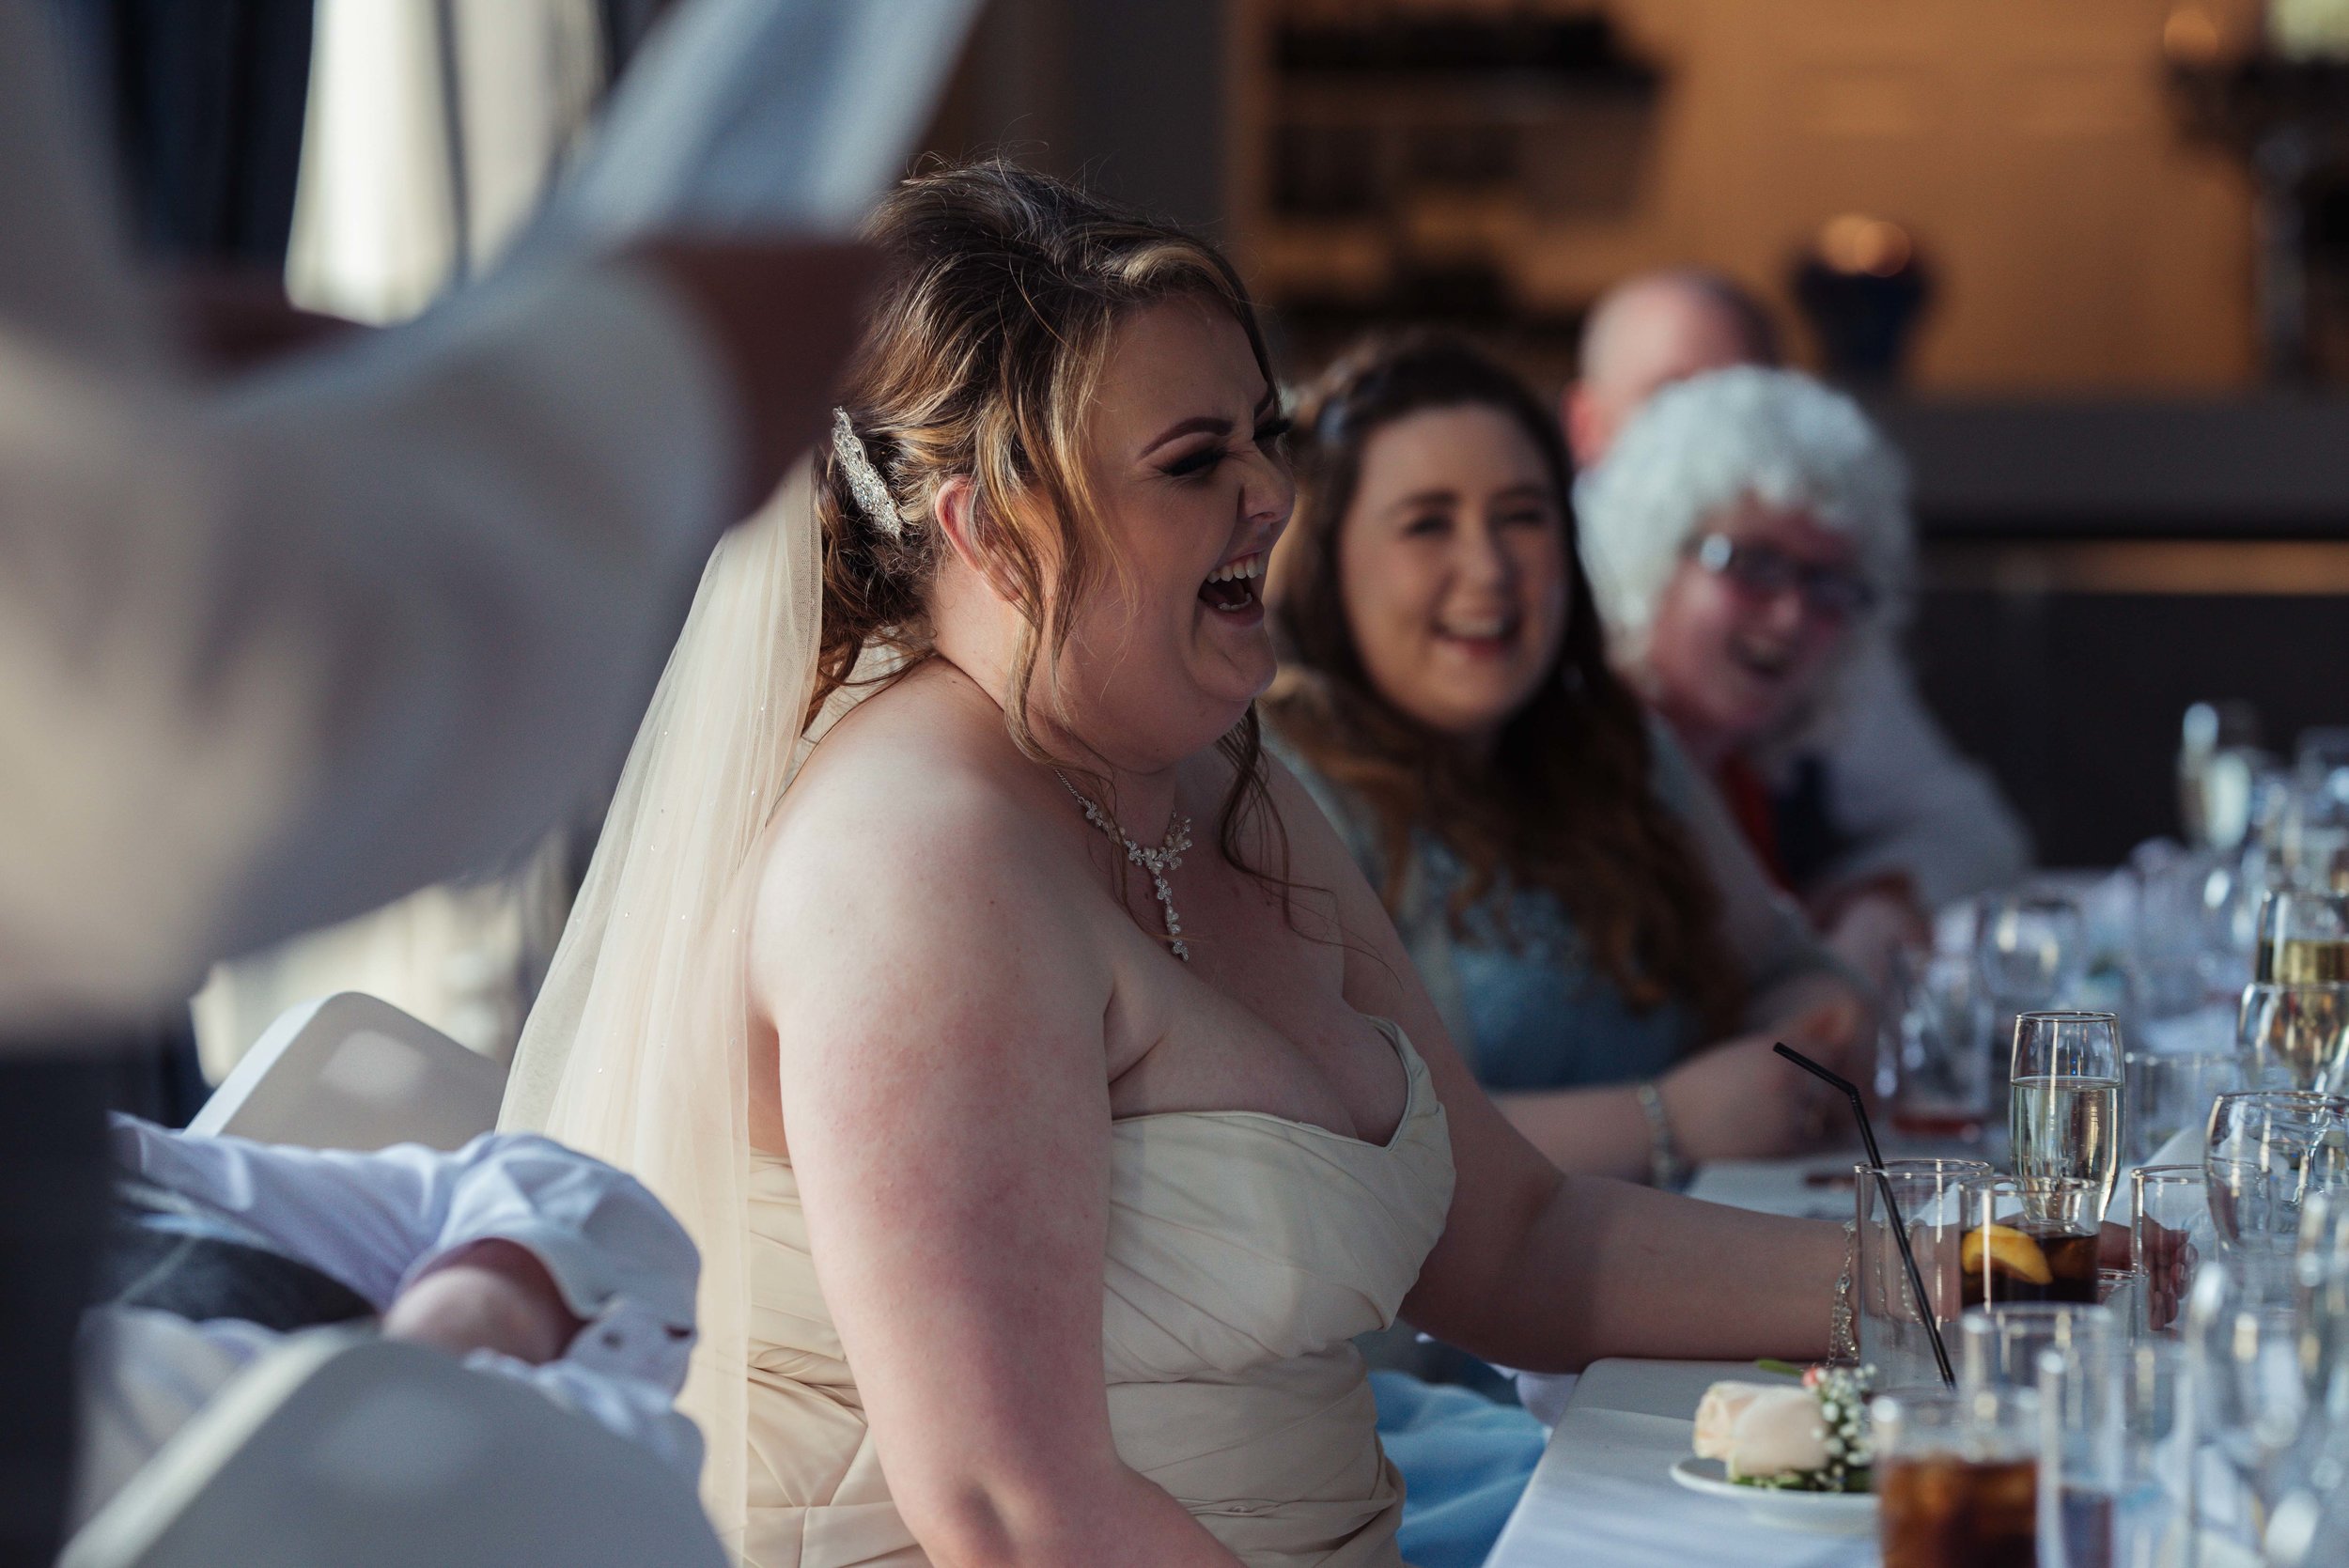 The bride has a huge laugh during one of the wedding soeeches